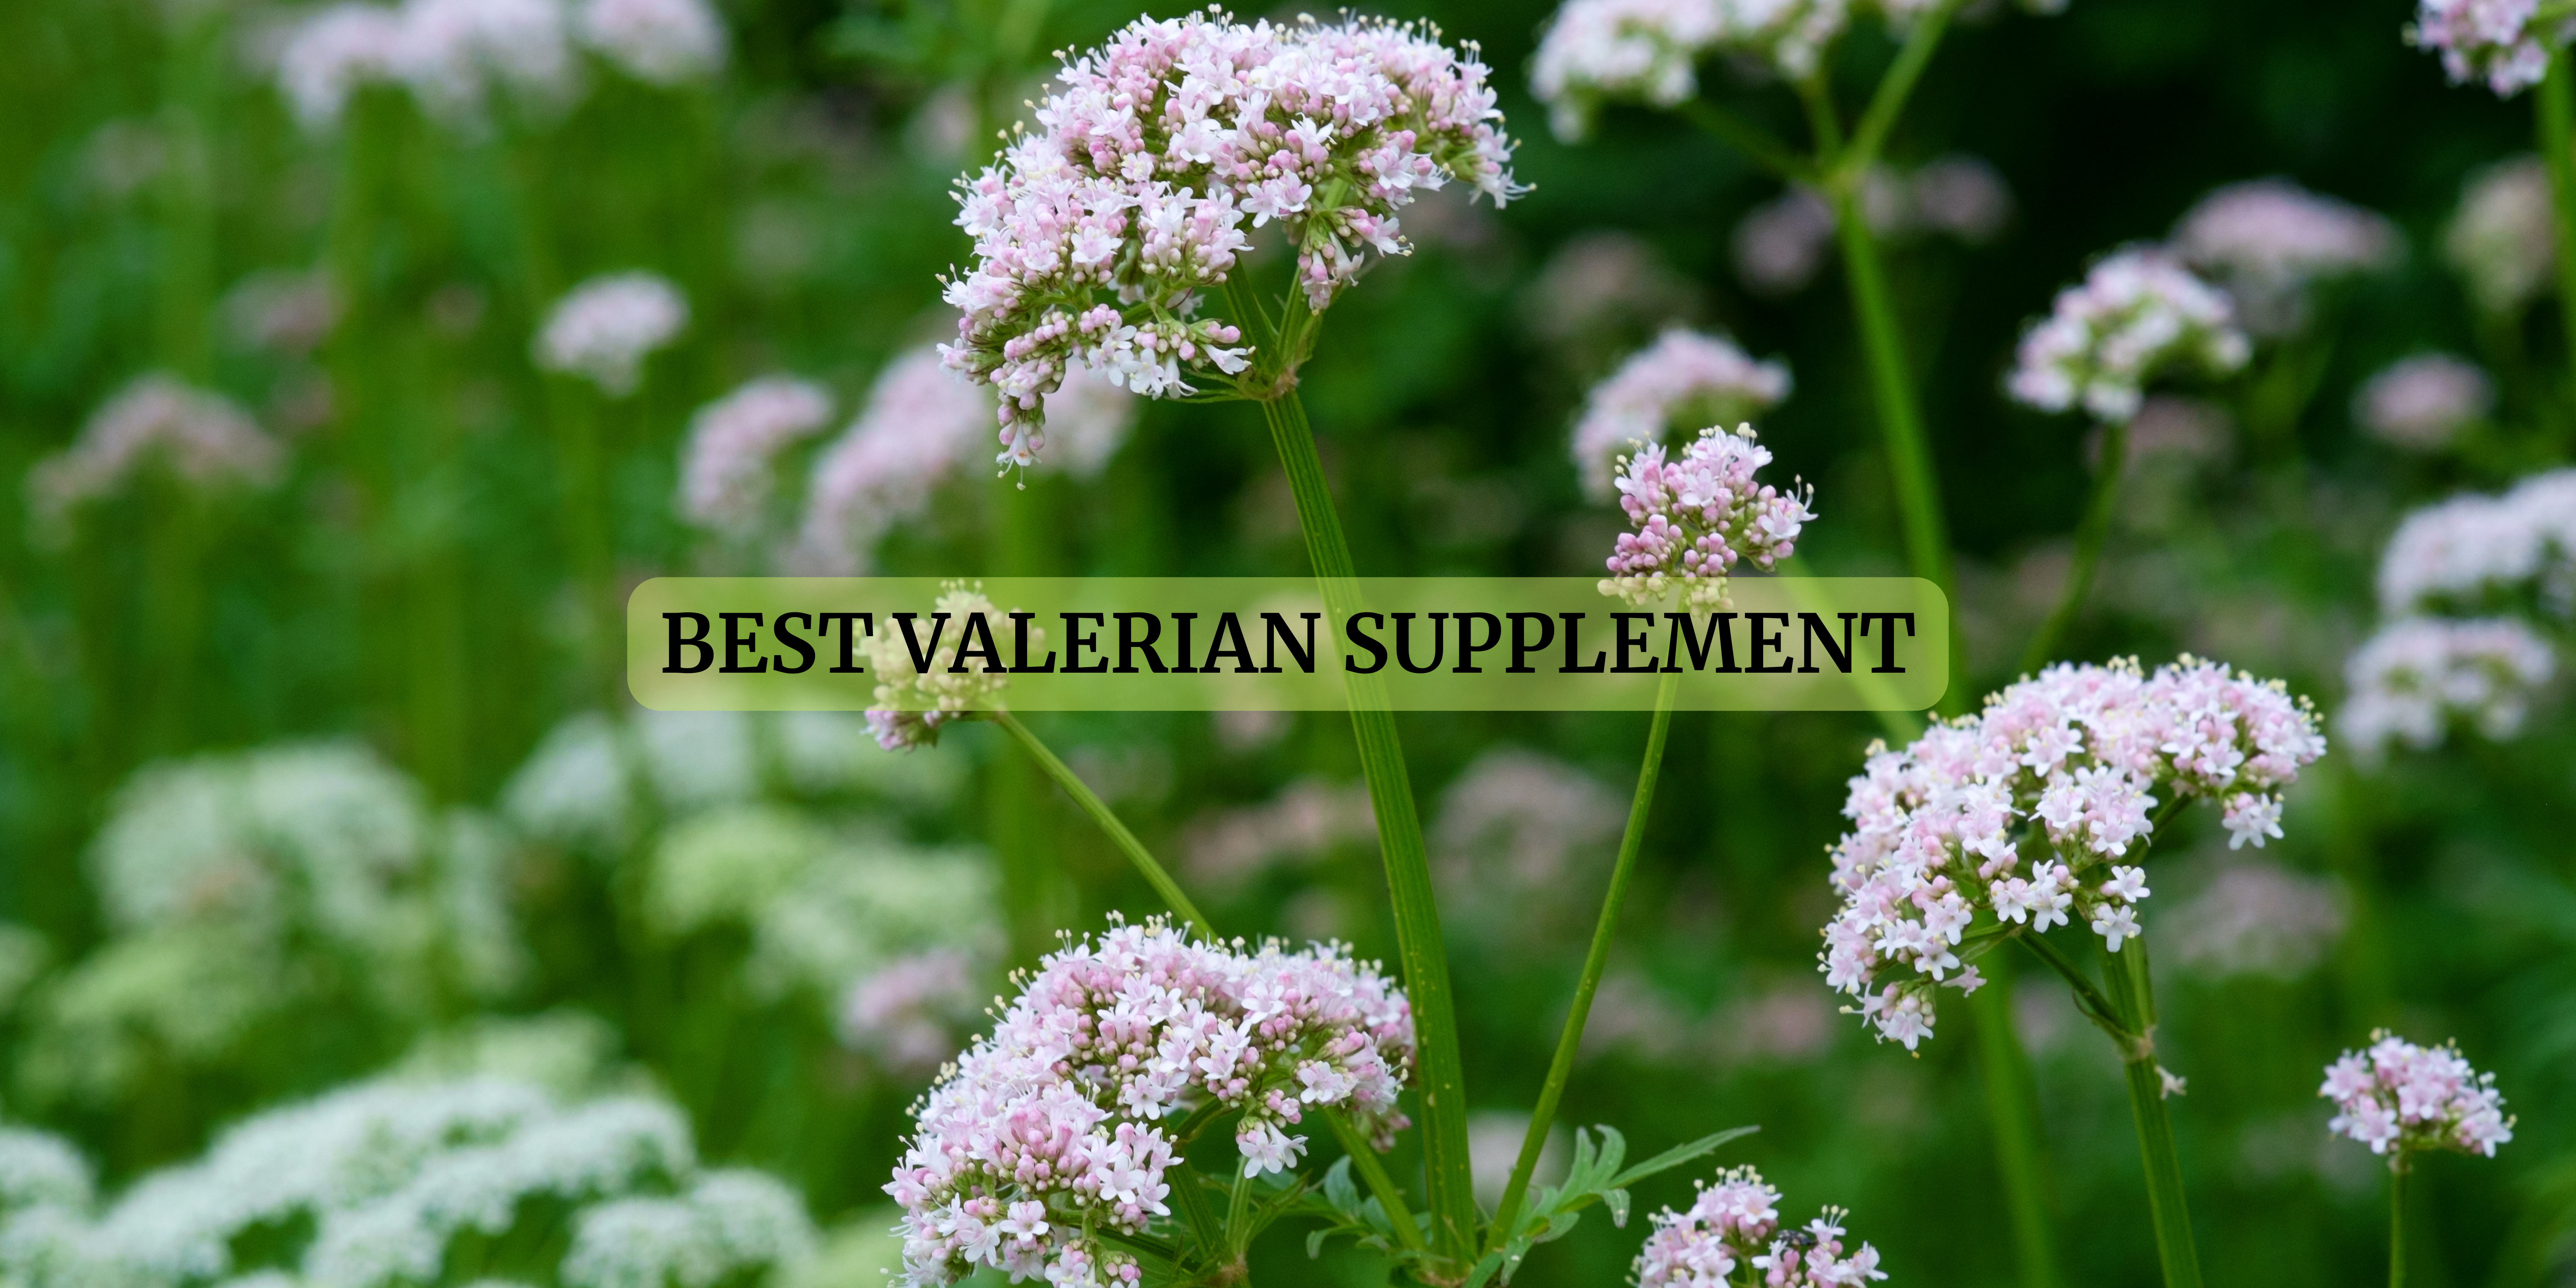 valerian supplements in Germany